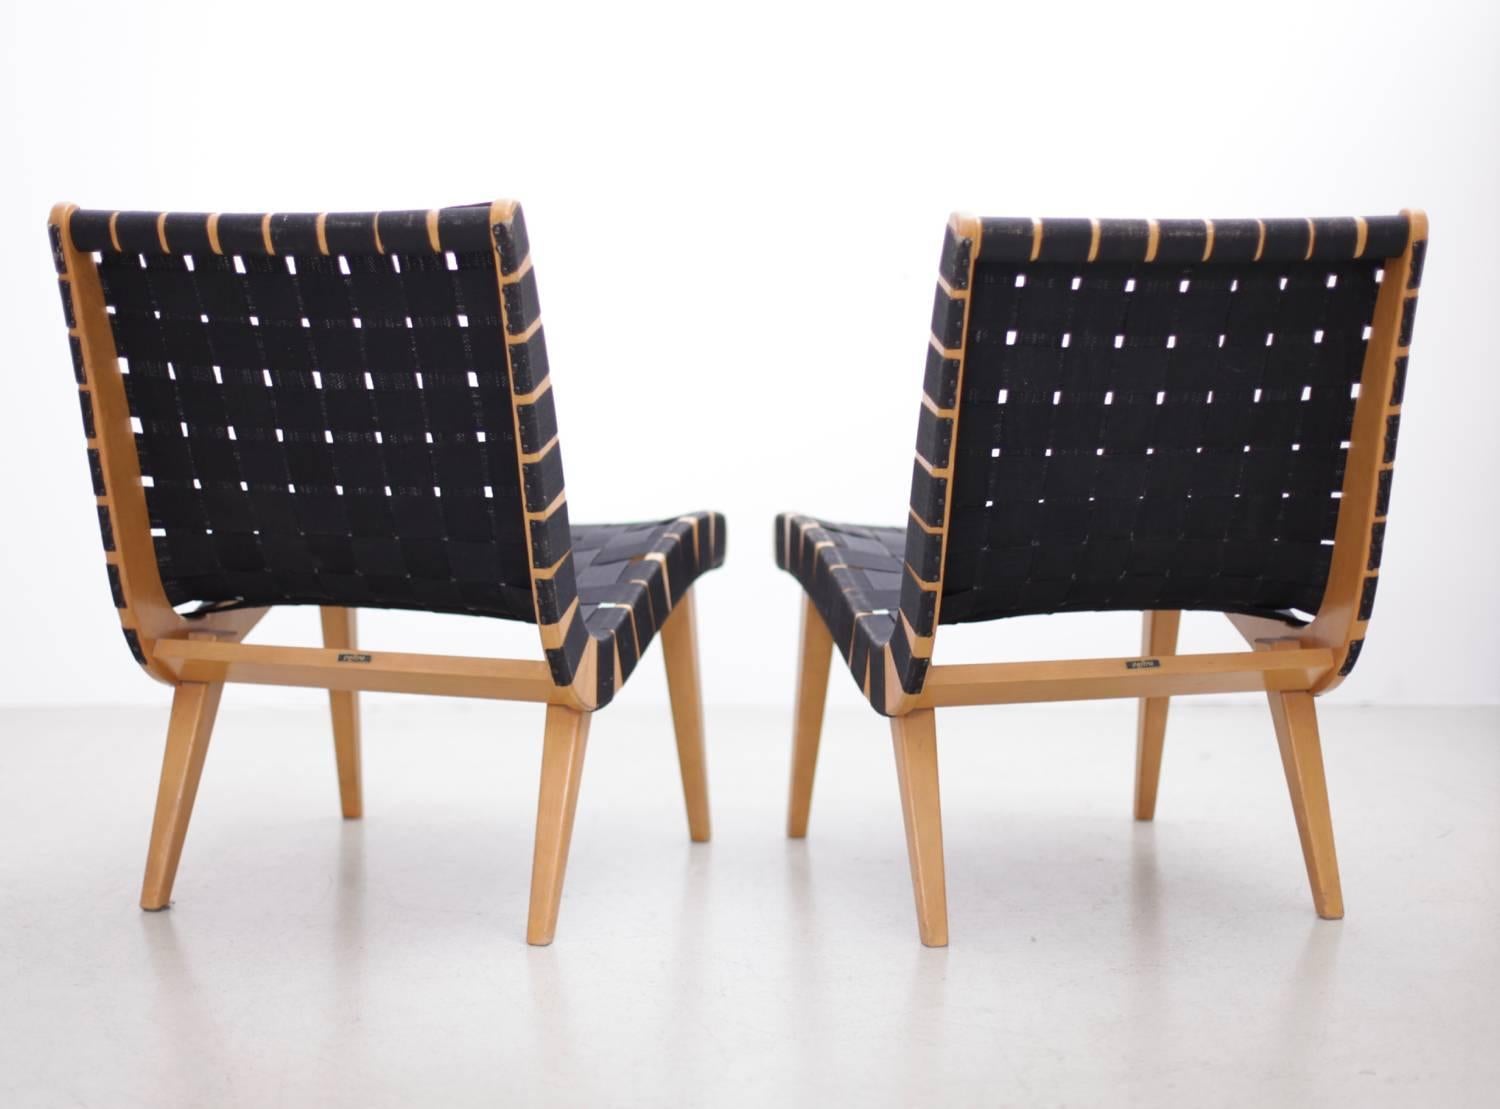 Mid-20th Century Pair of Matched Jens Risom Lounge Chairs in Black Webbing for Knoll